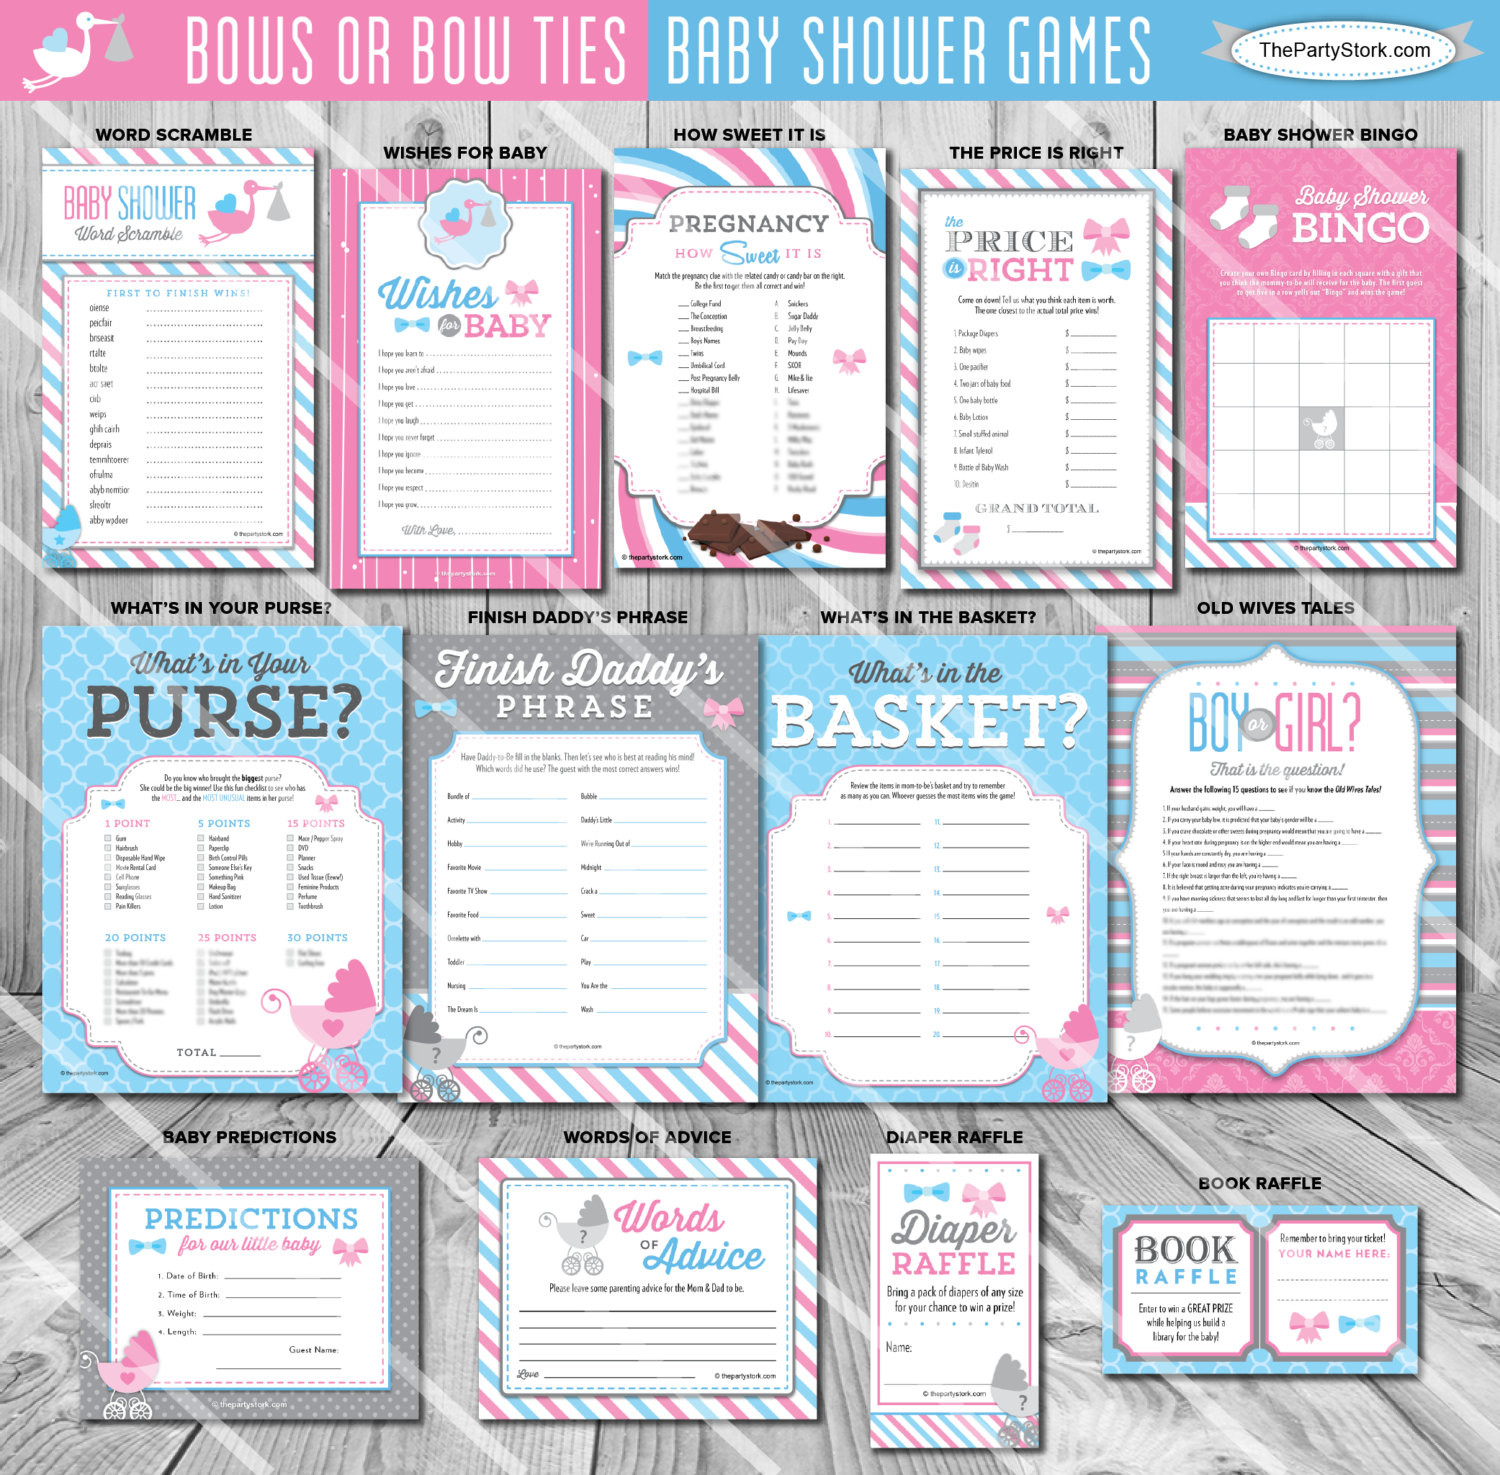 Baby Gender Reveal Party Games
 Gender Reveal Party Games Bows or Bowties Baby Shower